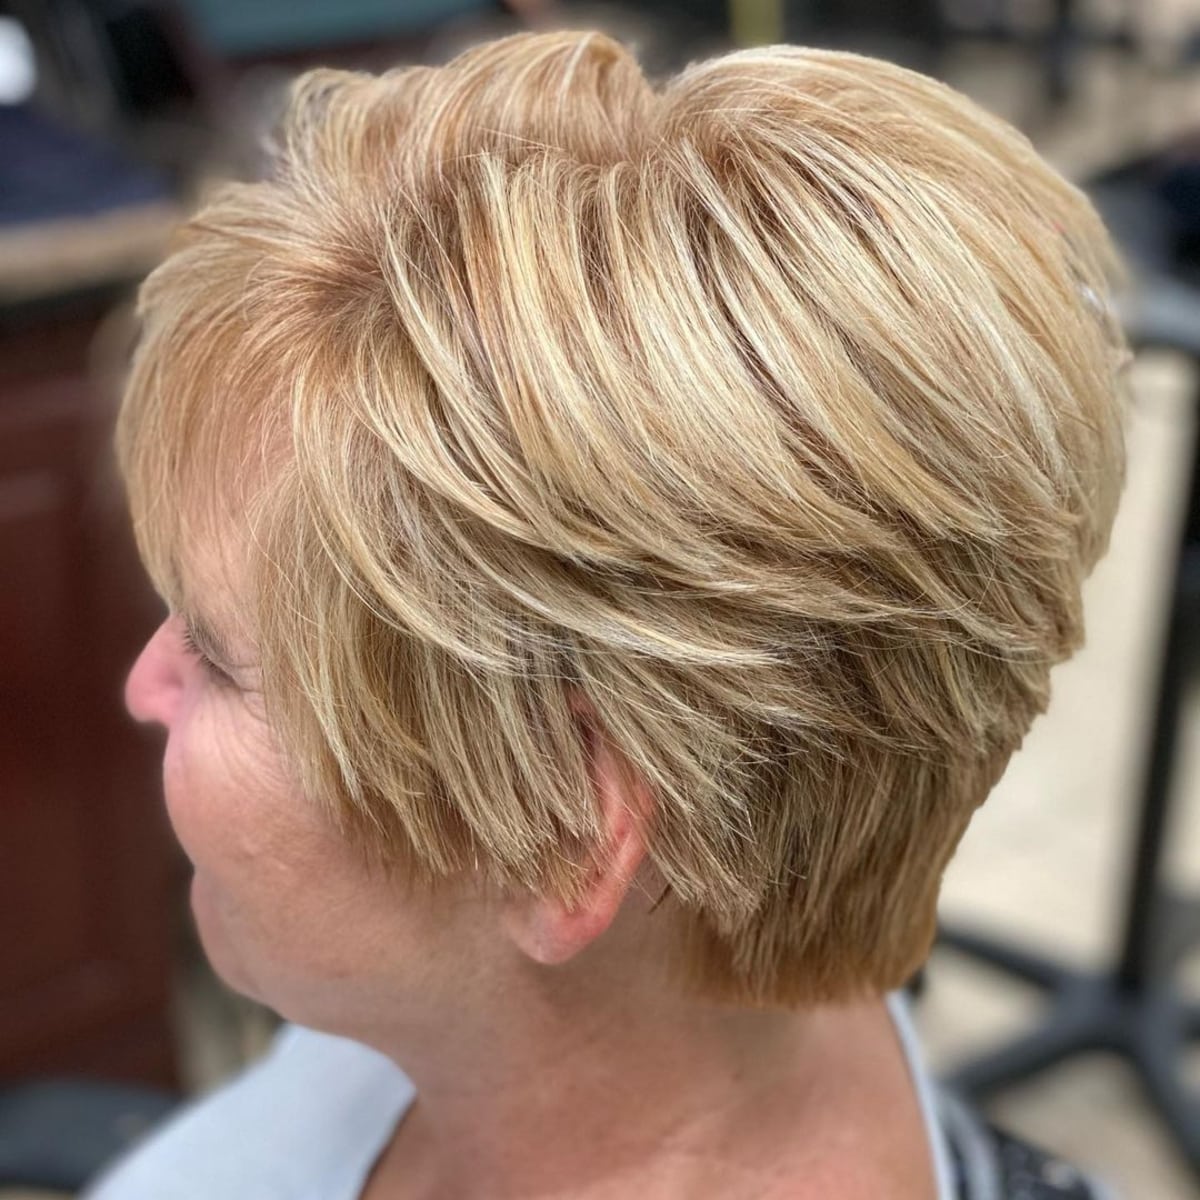 Short layered cut for over 50 ladies with fine hair